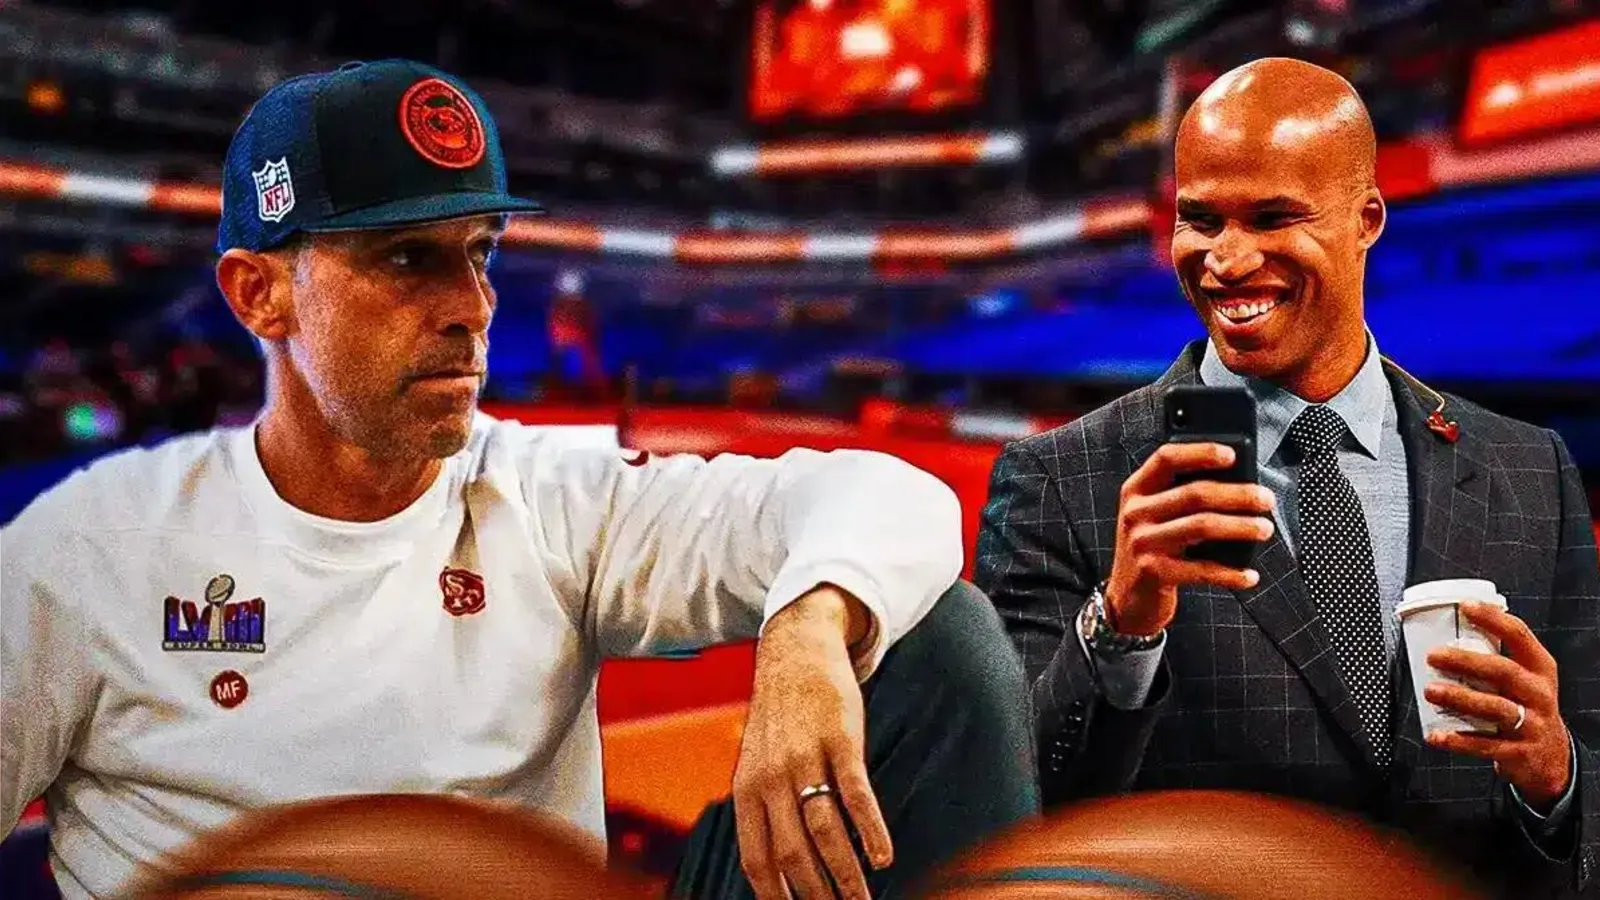 49ers catch stray from Richard Jefferson during Celebrity All-Star game rules explanation